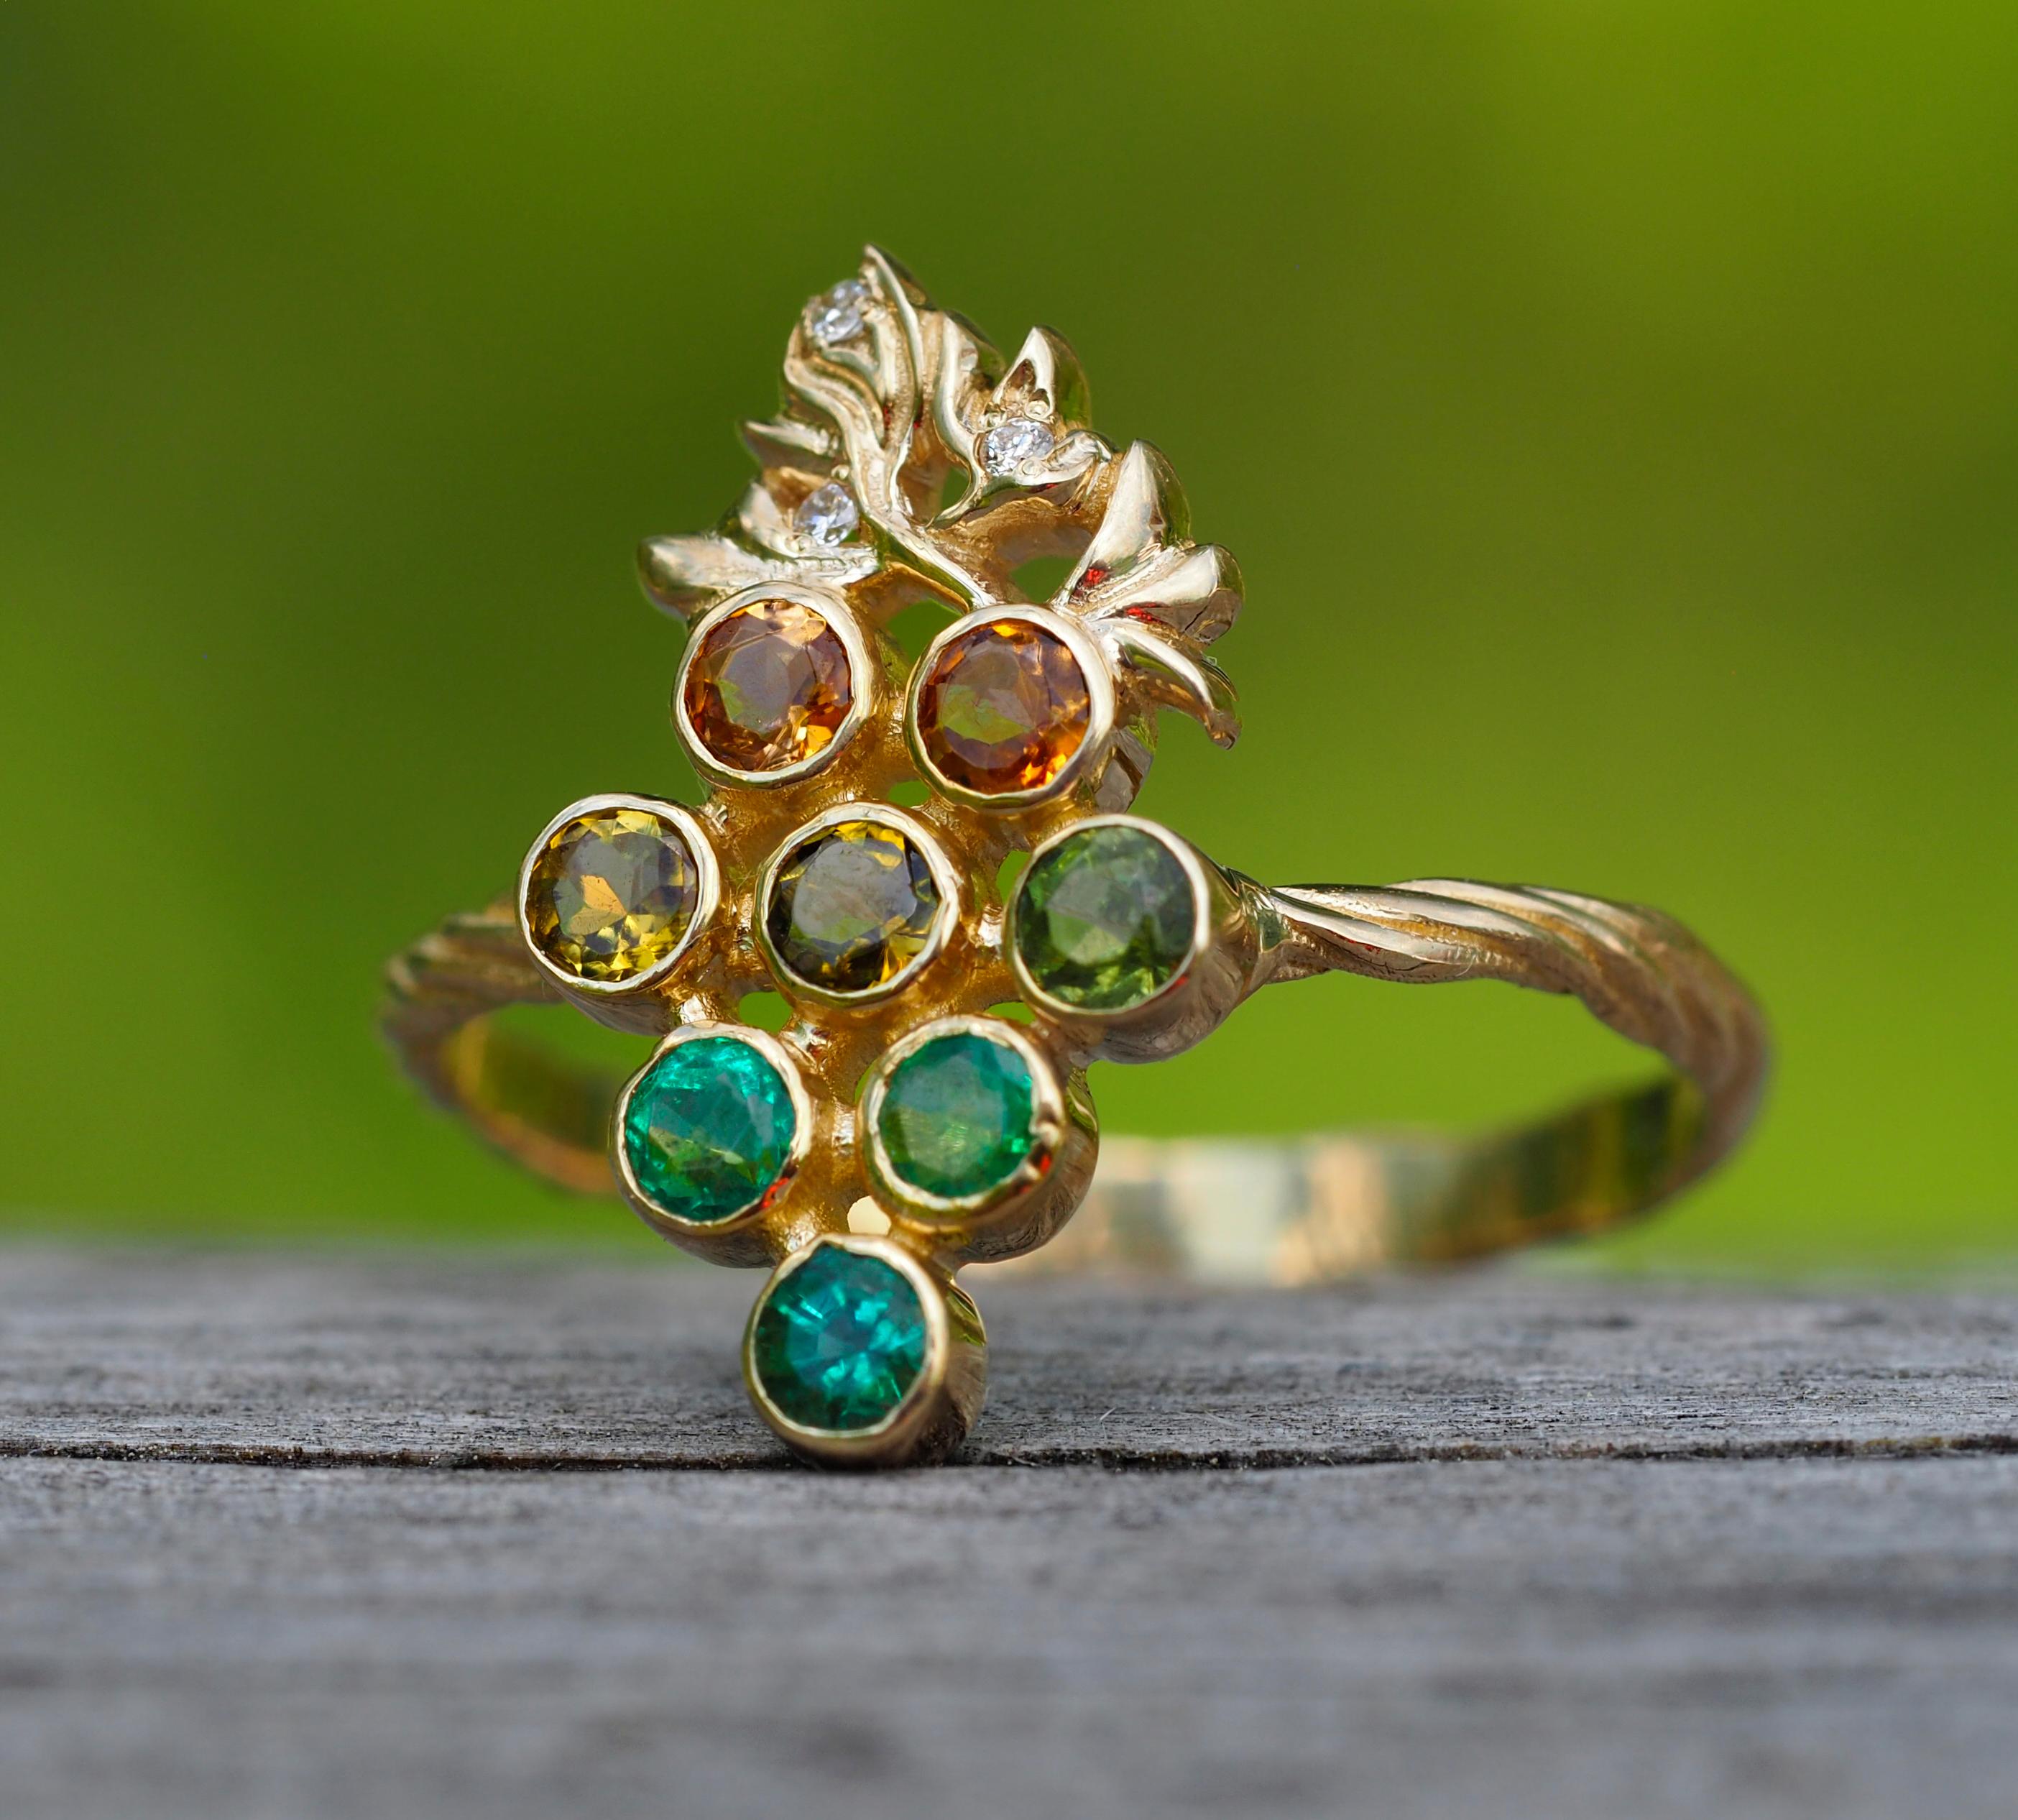 For Sale:  14k Gold Ring with Tourmalines, Emeralds and Diamonds, Grape Ring 14